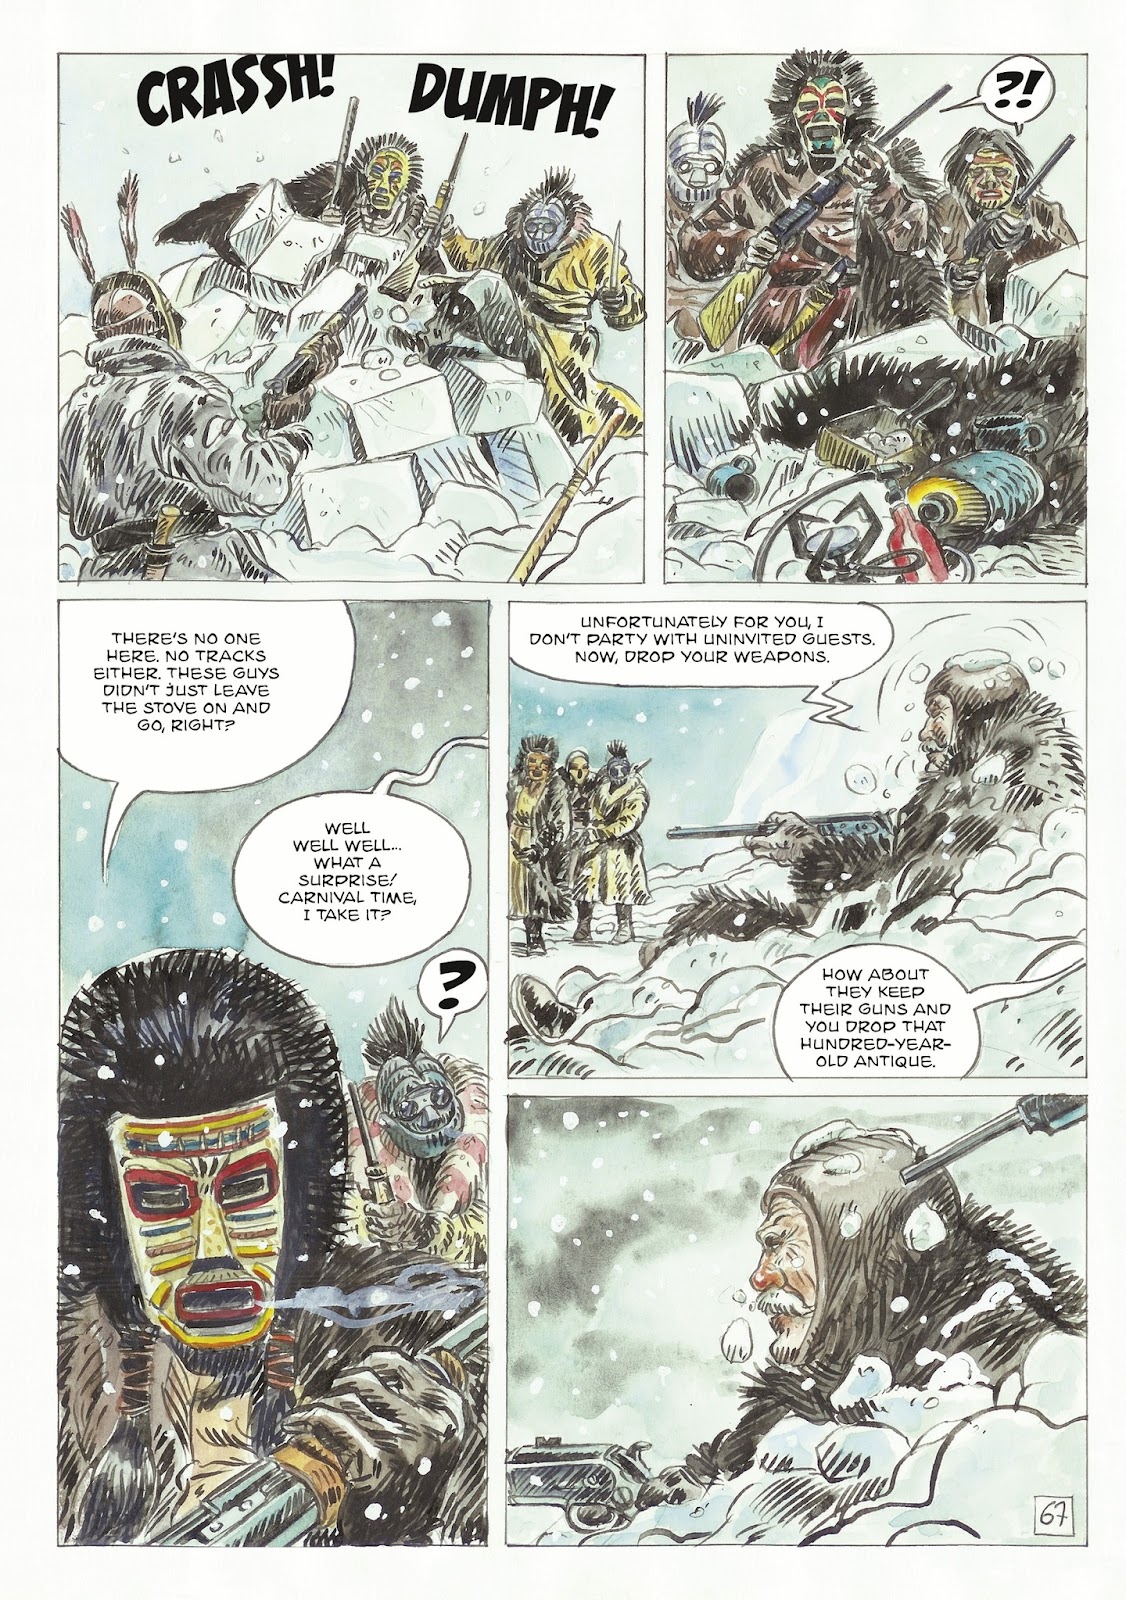 The Man With the Bear issue 2 - Page 13